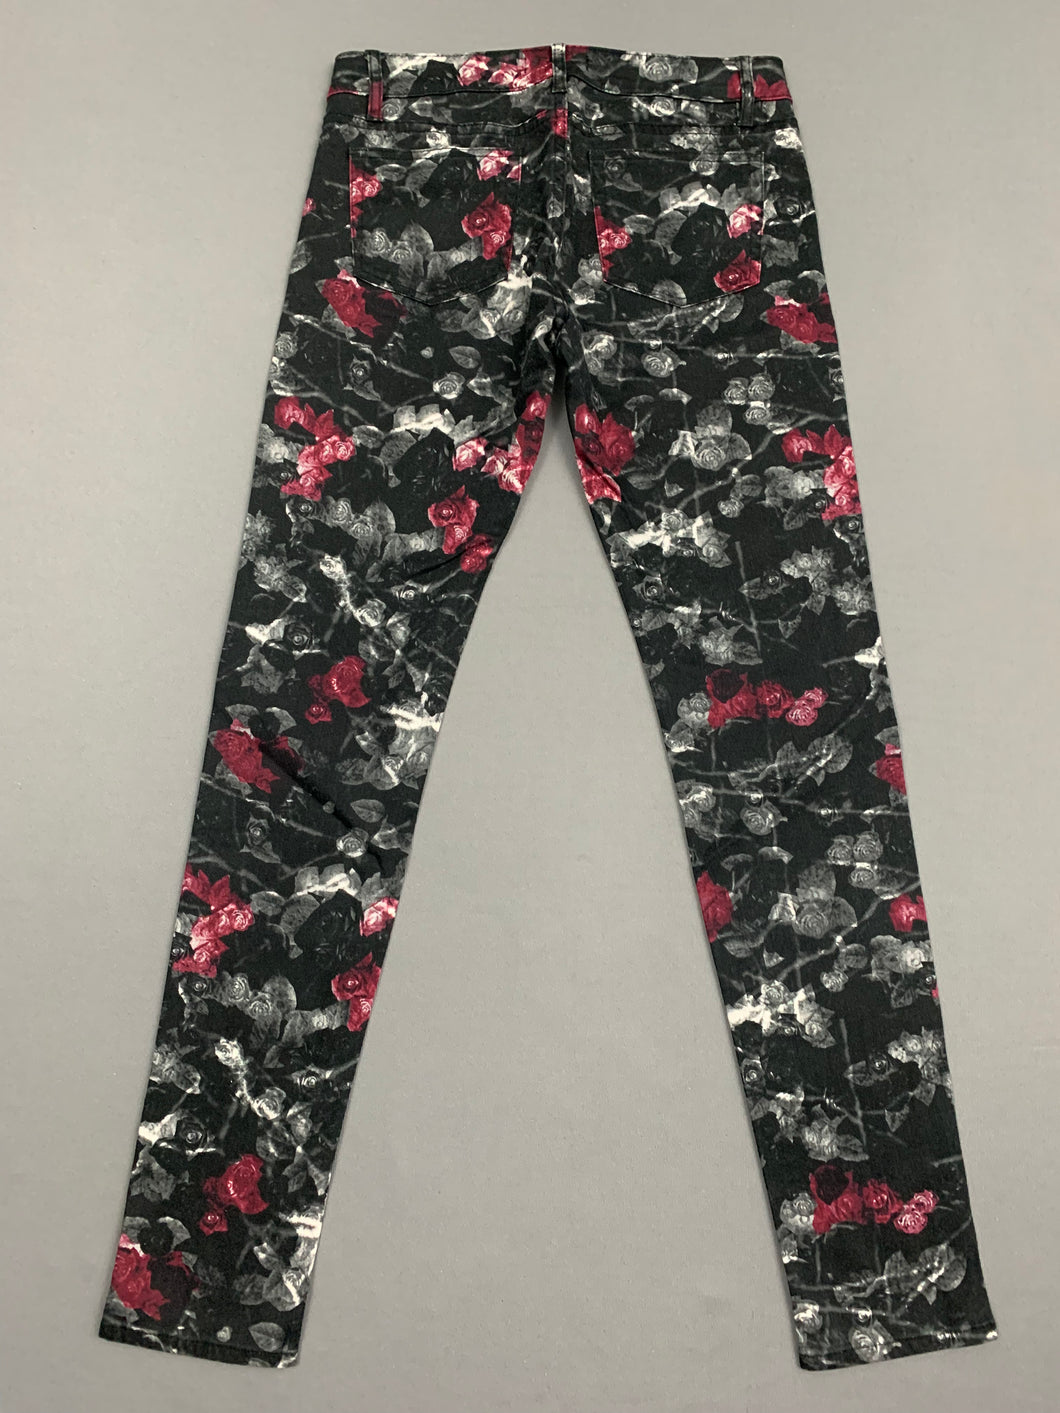 THE KOOPLES FLORAL PRINT JEANS - Womens Size Waist 28